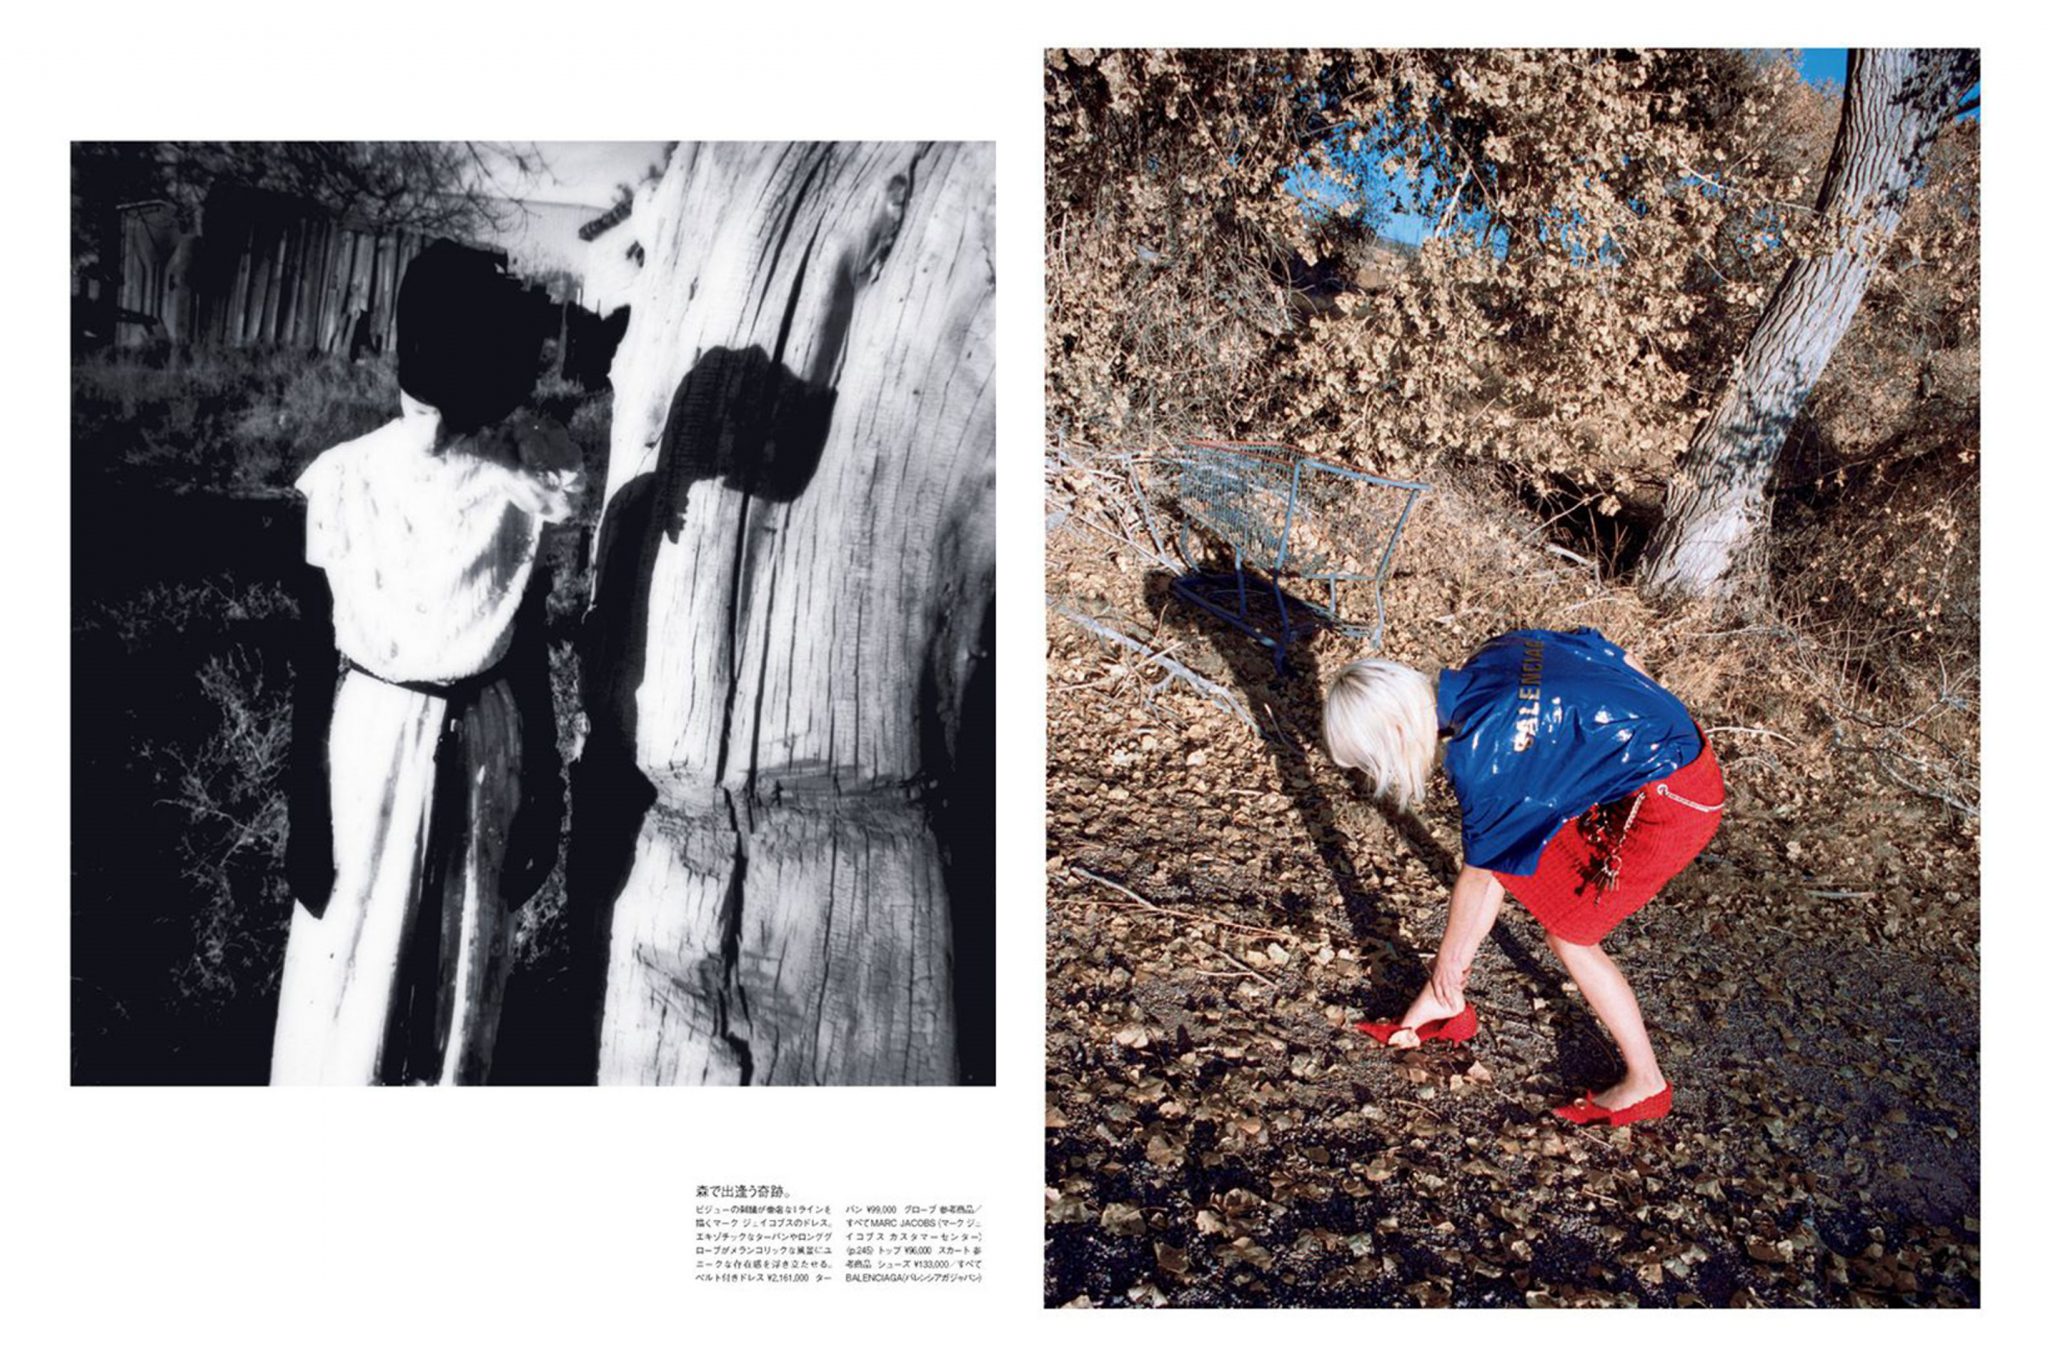 Paul Sinclaire | Vogue Japan: My Country Roots | 3